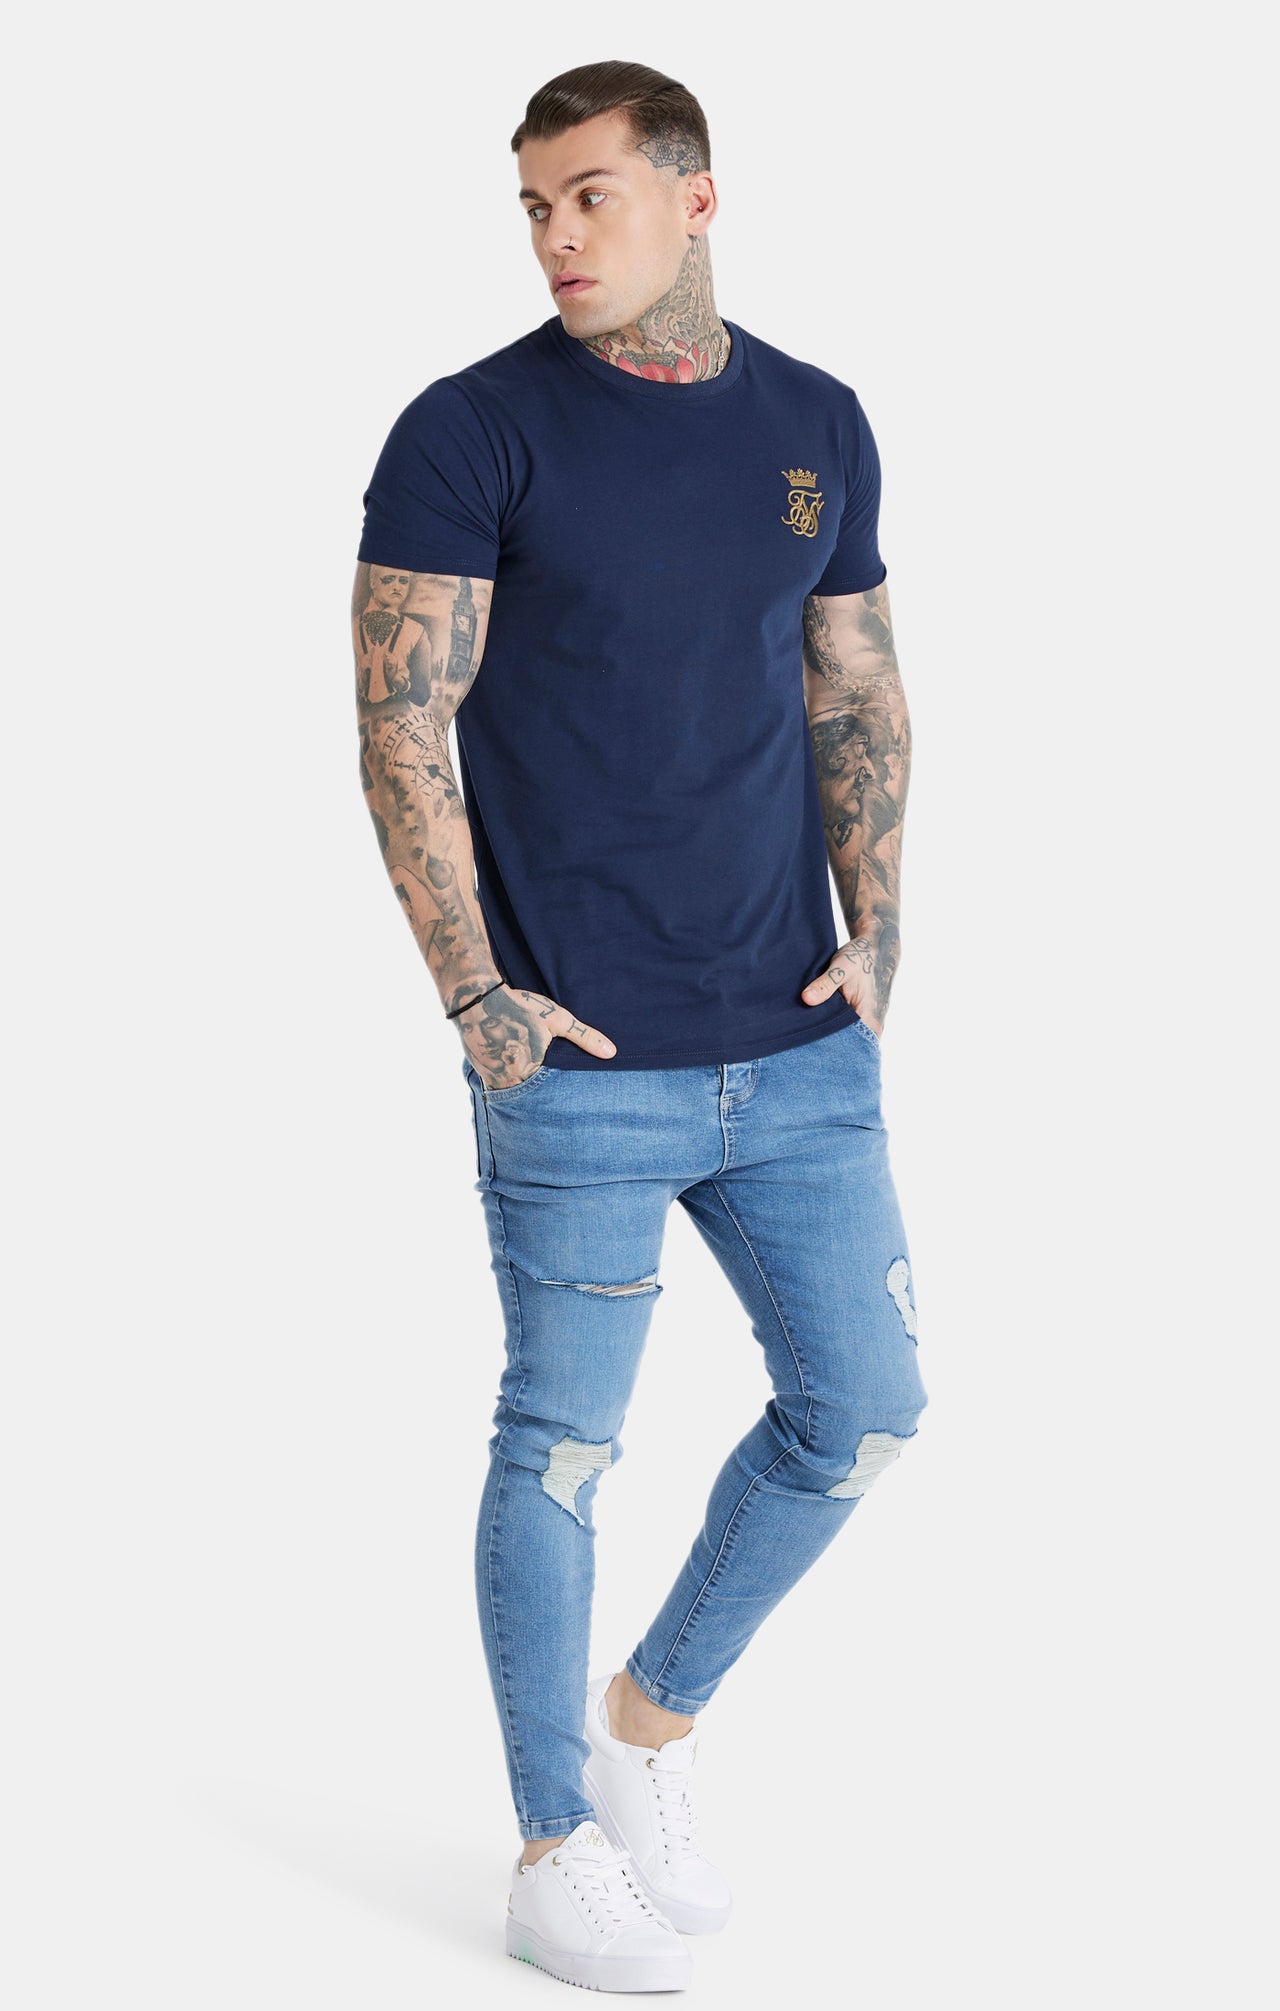 Messi x SikSilk Navy Muscle Fit (2)